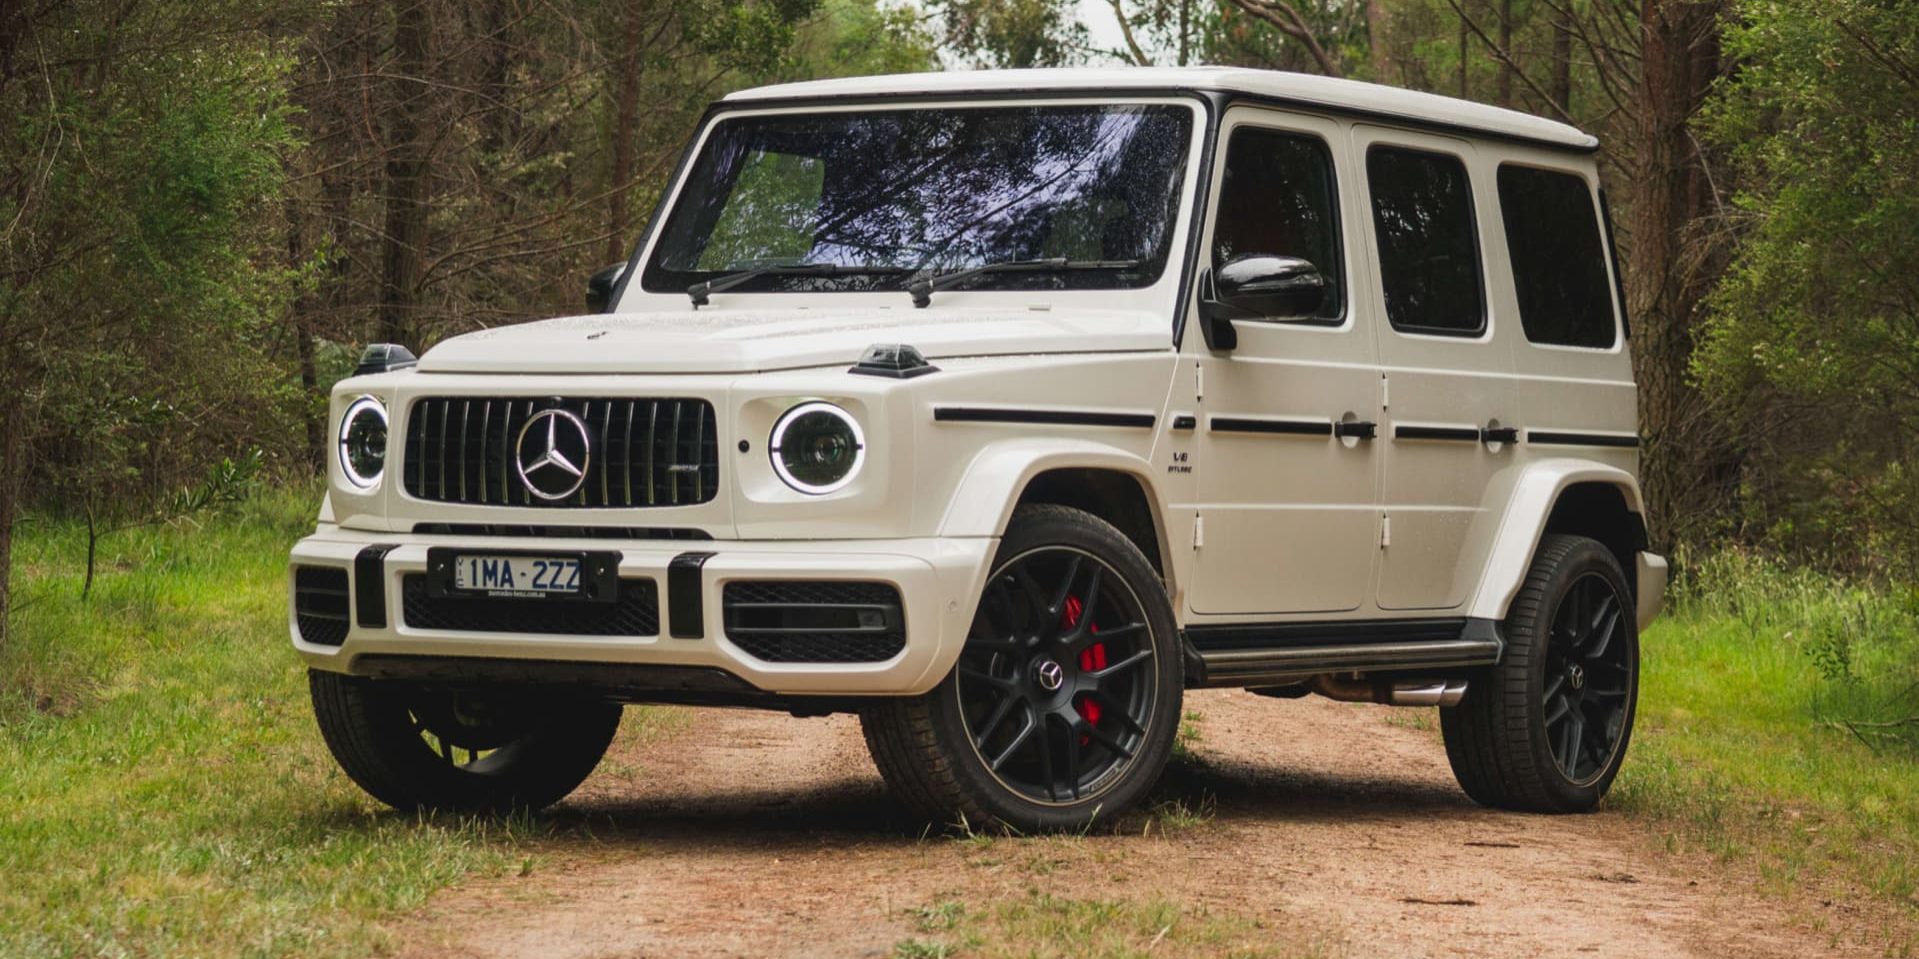 Mercedes-Benz G-Class production to end, ahead of more aerodynamic model next year – report